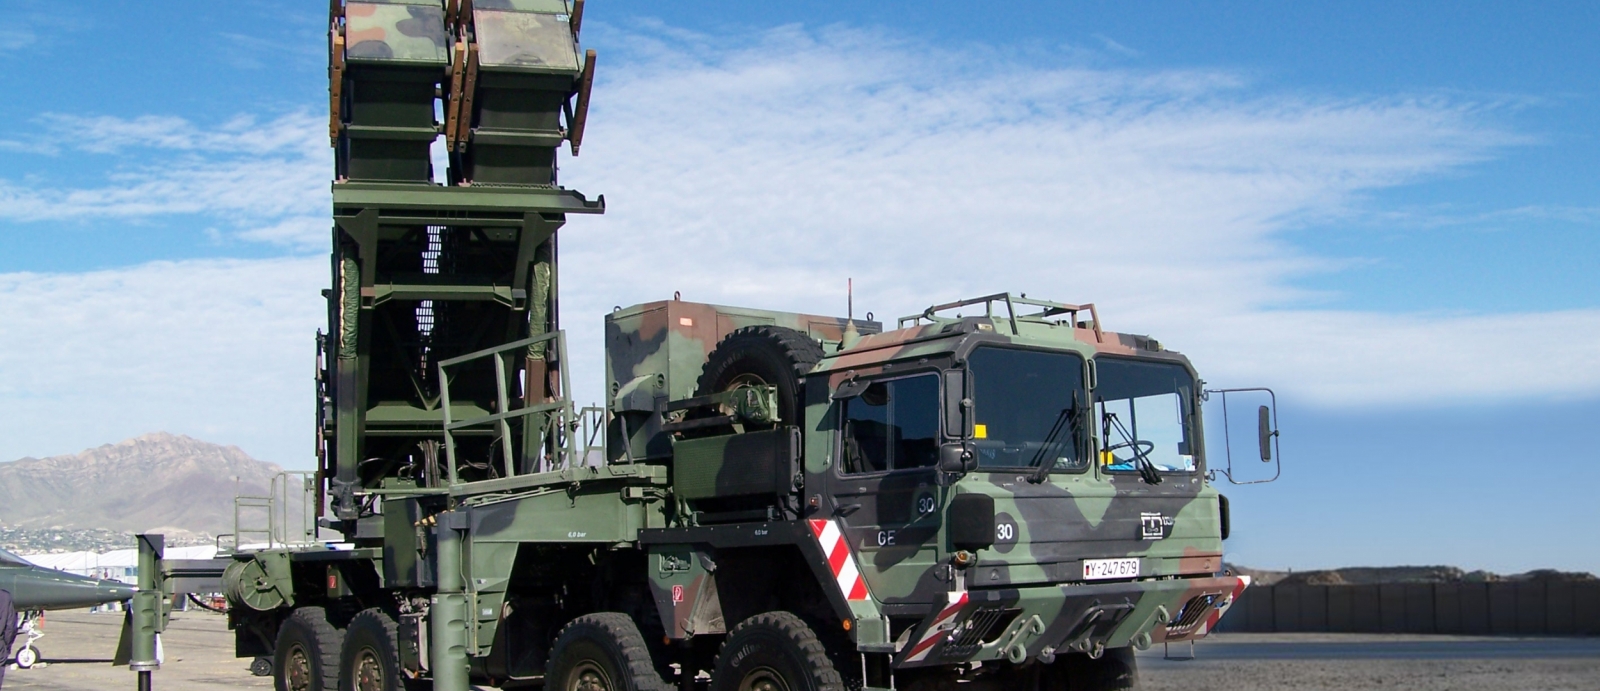 A Patriot missile launching system.